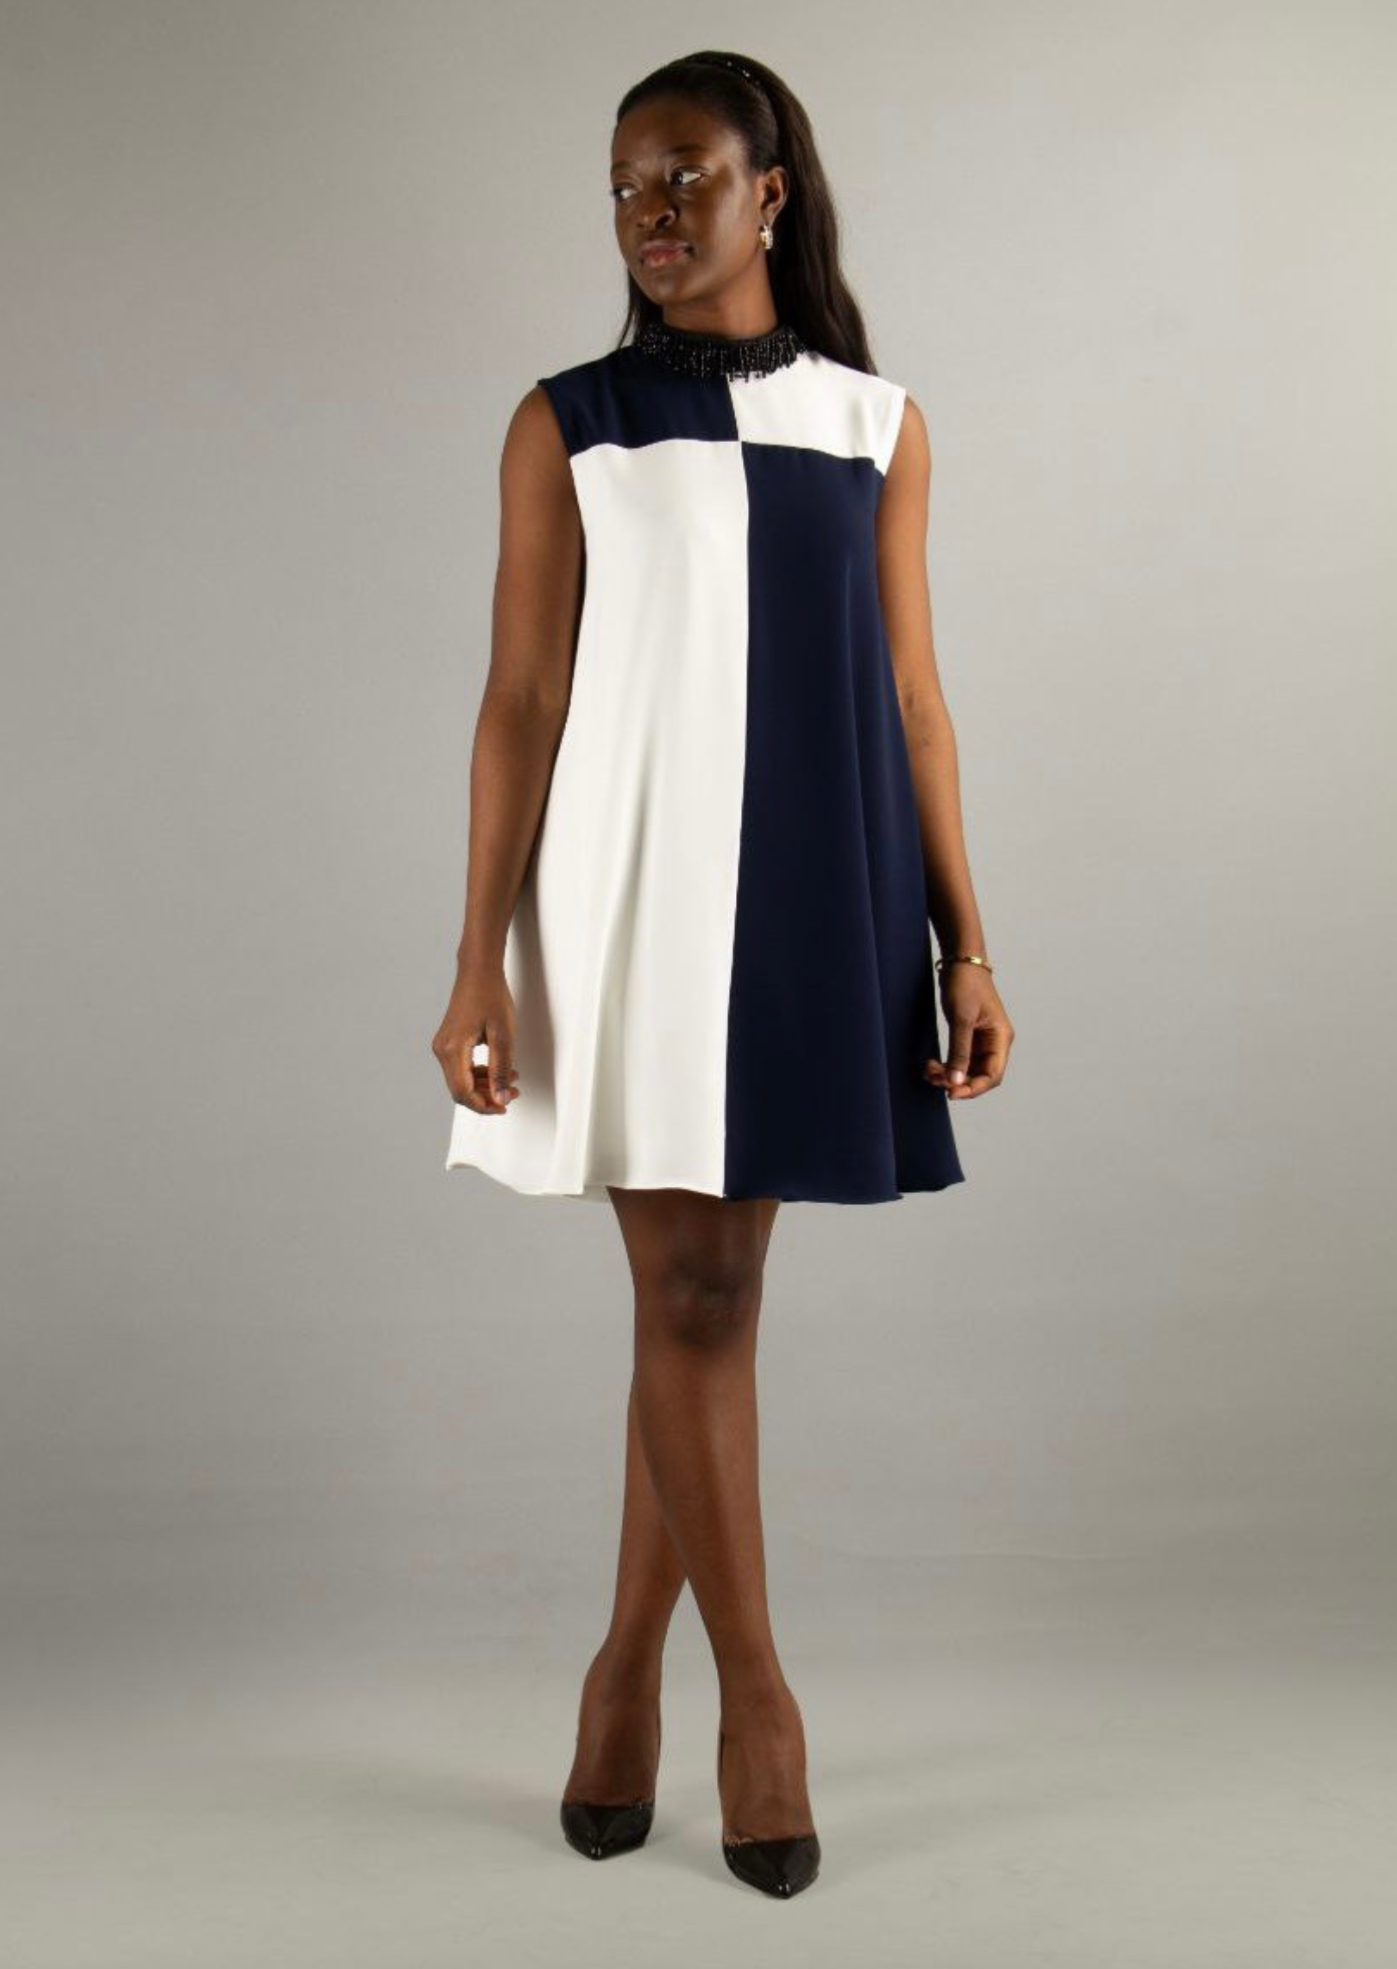 Layla Blue and White Contrast Dress